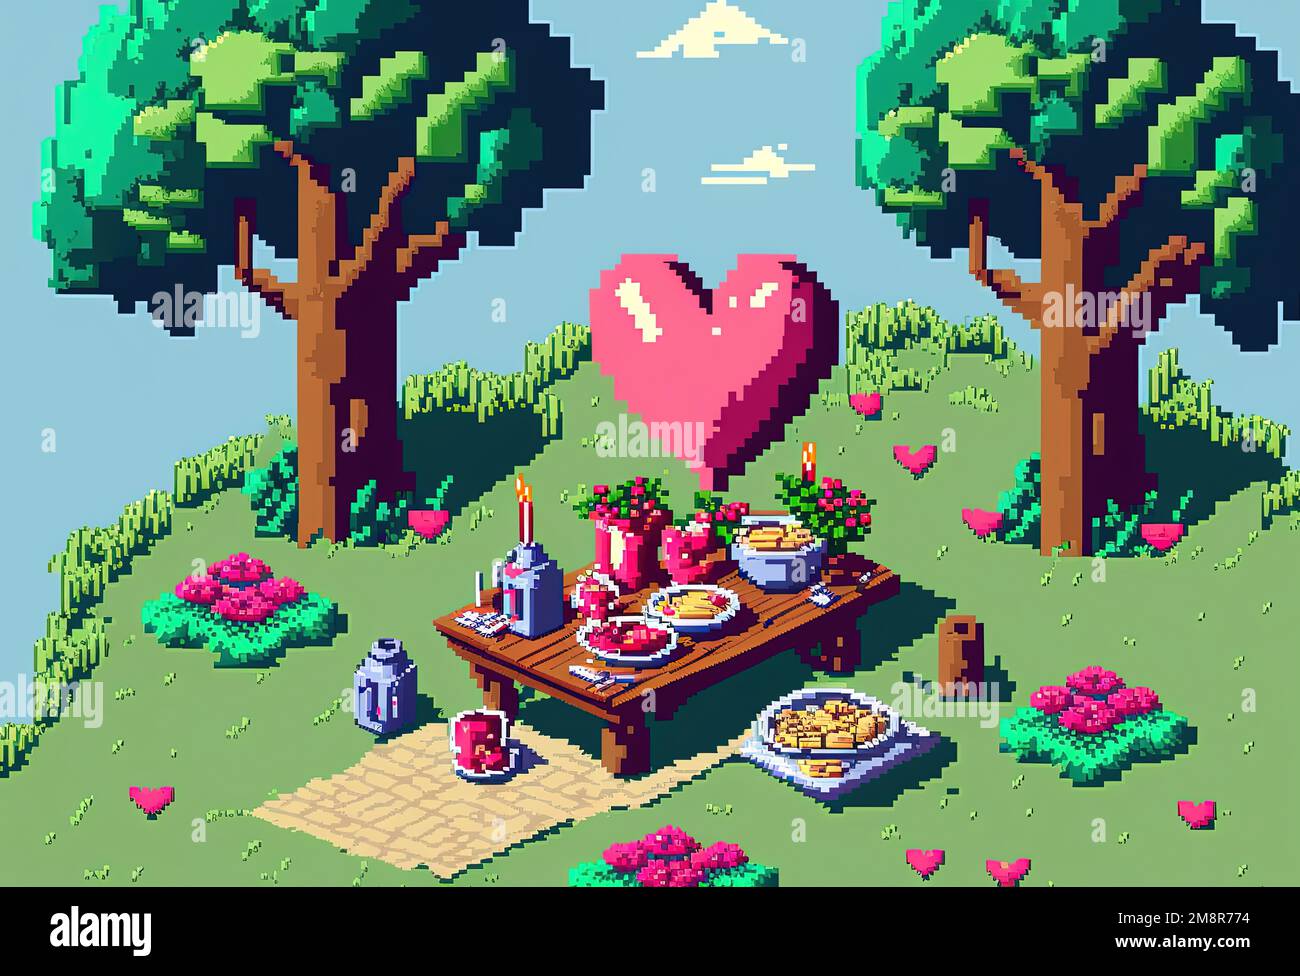 Pixelart Picnic Arrangement With Food and A Big Red Heart Stock Photo